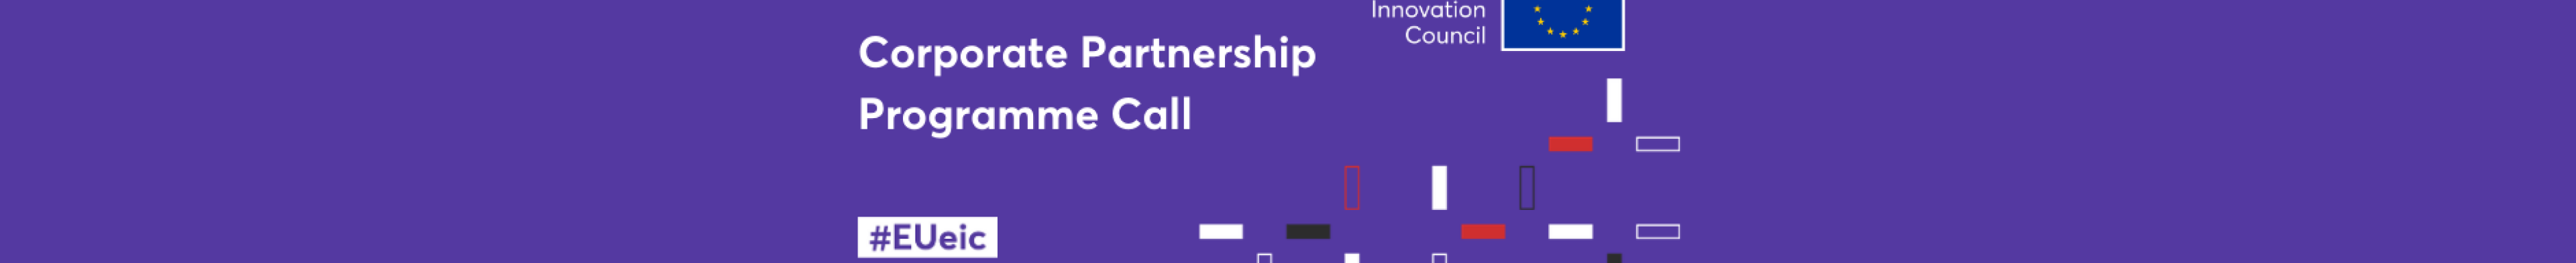 banner-corporate_partnership_programme_call.png